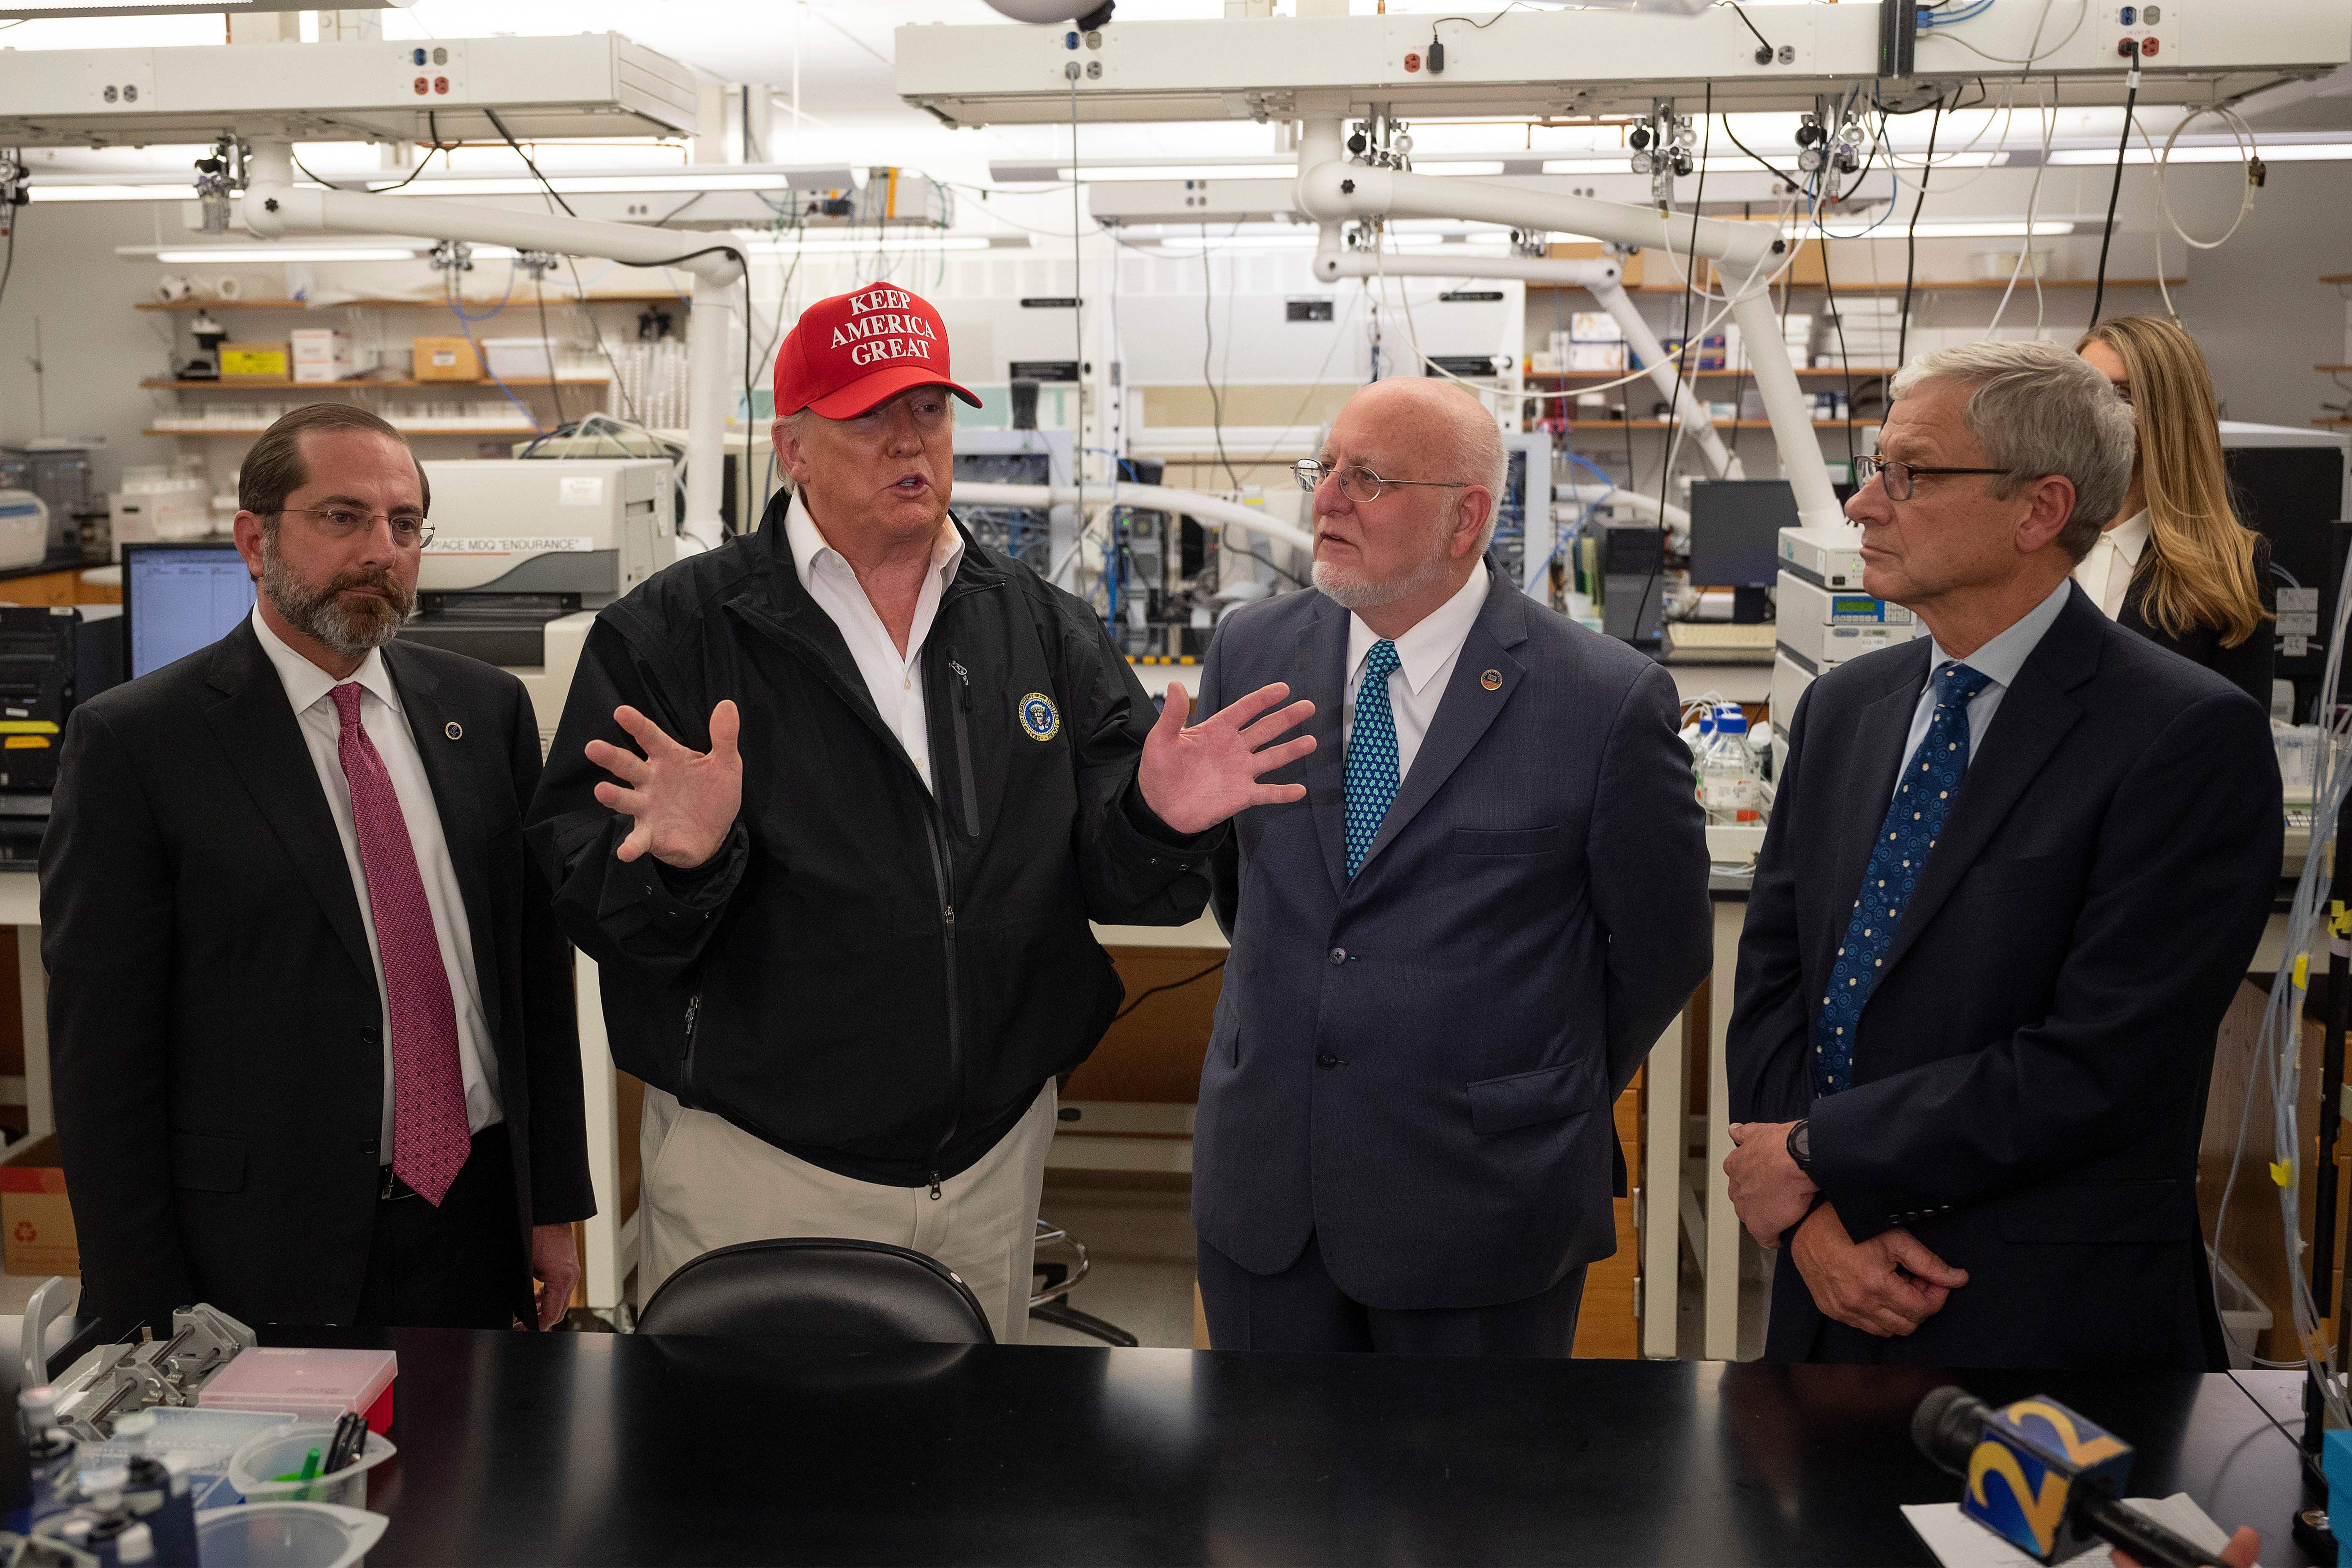 Azar, Trump, Redfield, and Monroe stand in a lab. Trump gestures with his hands and wears a MAGA hat.